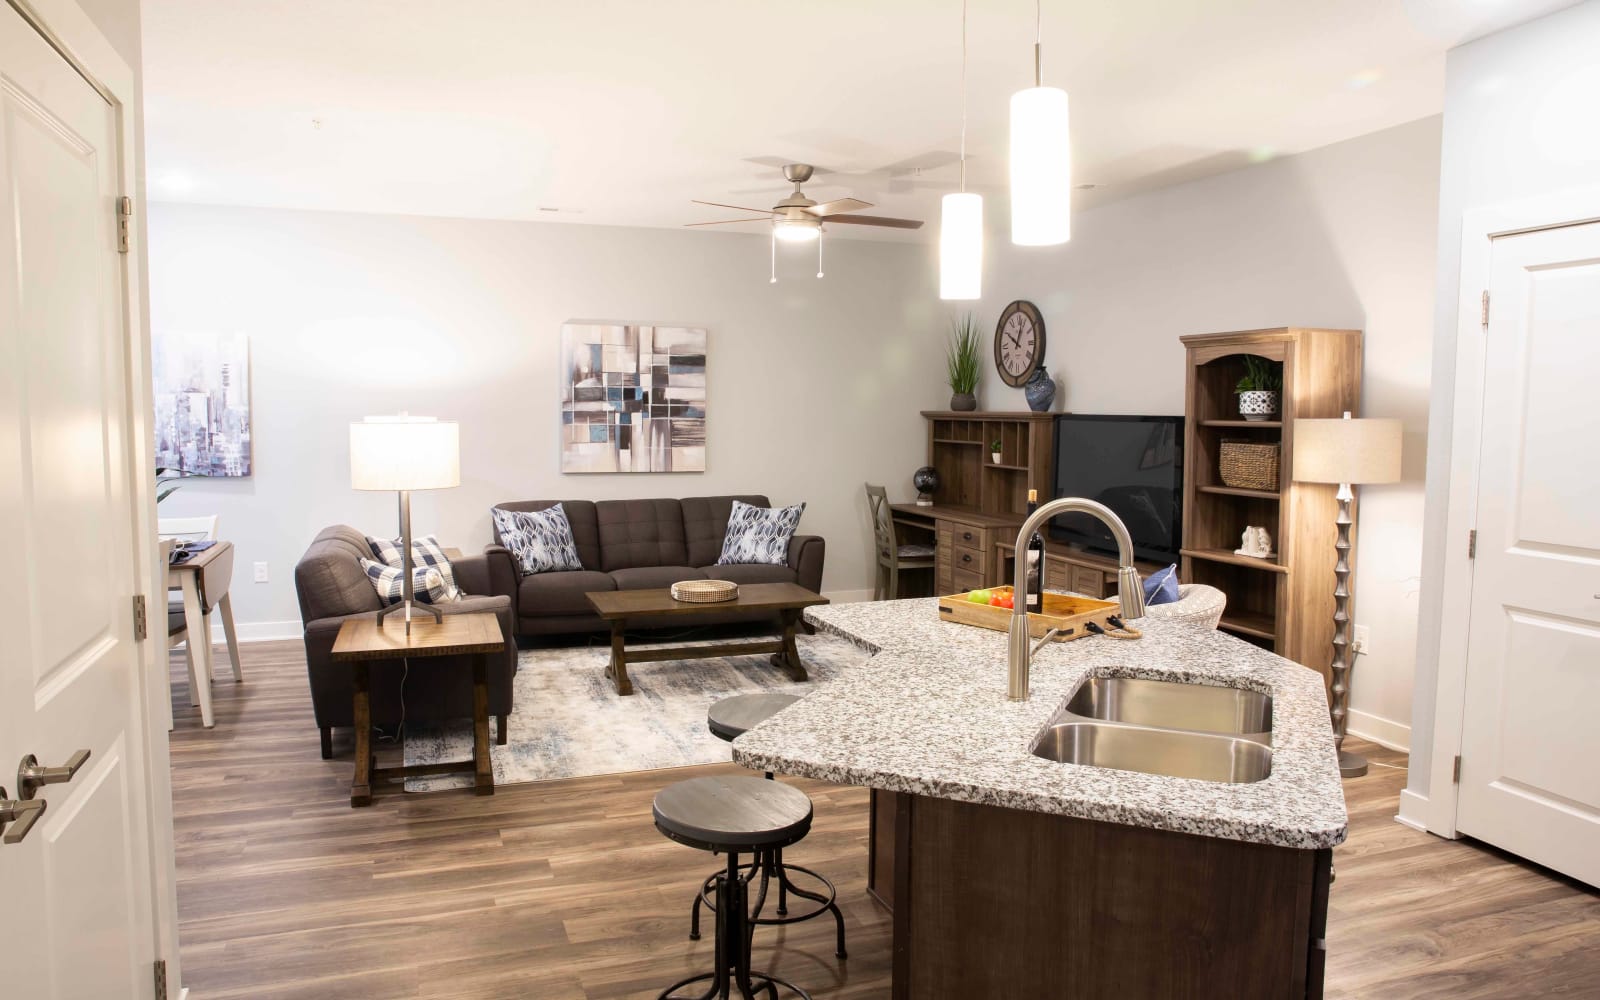 A living room and open kitchen with wood flooring at Attivo Trail Waukee in Waukee, Iowa